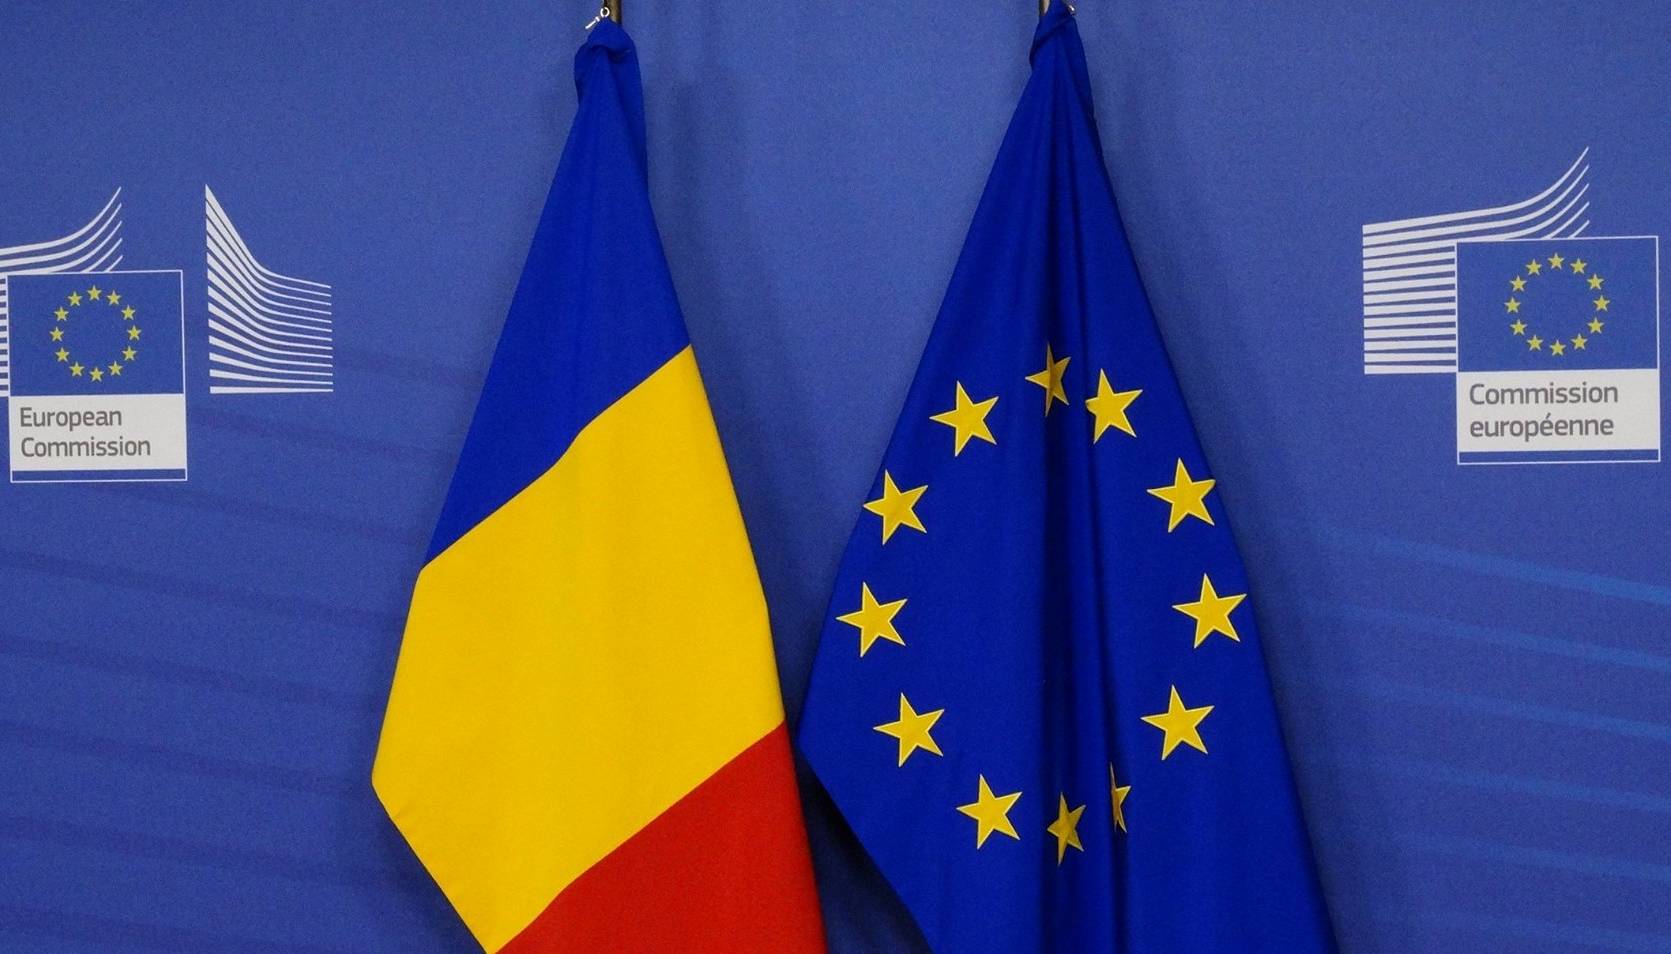 The European Commission will Grant New Loans to Ukraine